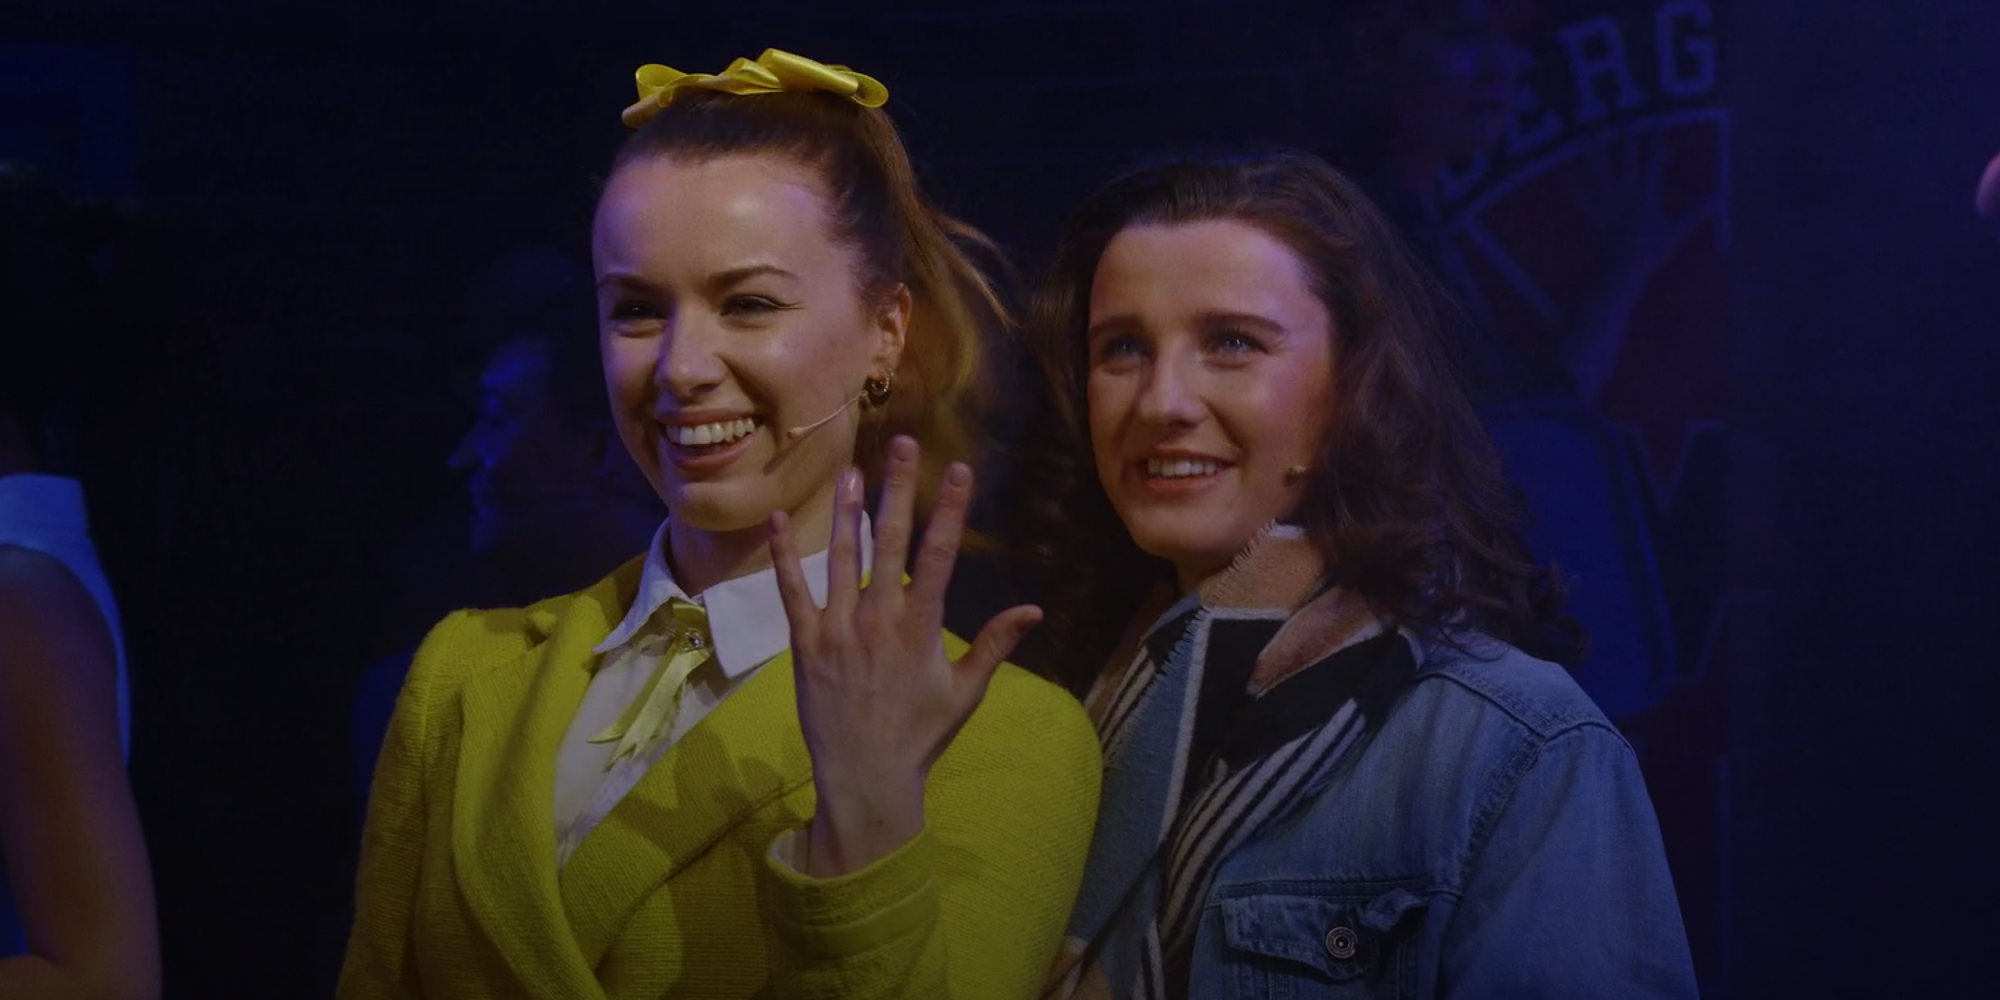 Heather McNamara showing off an imaginary engagement ring beside Veronica in Heathers: The Musical